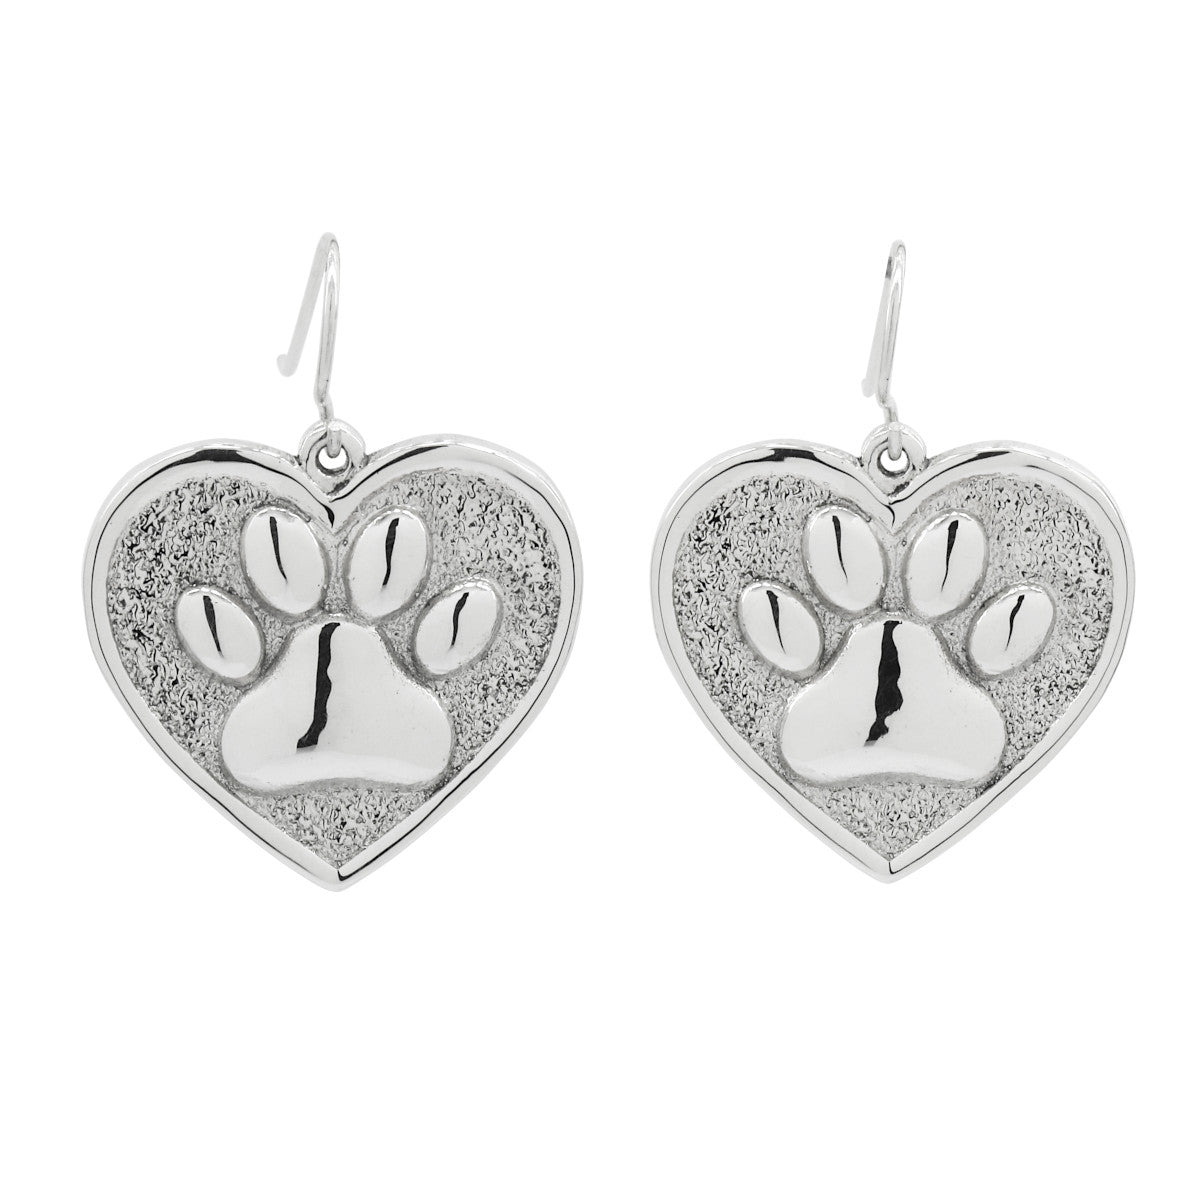 925 Sterling Silver Cat or Dog Paw Print Heart Earrings w/ French Wire Hooks